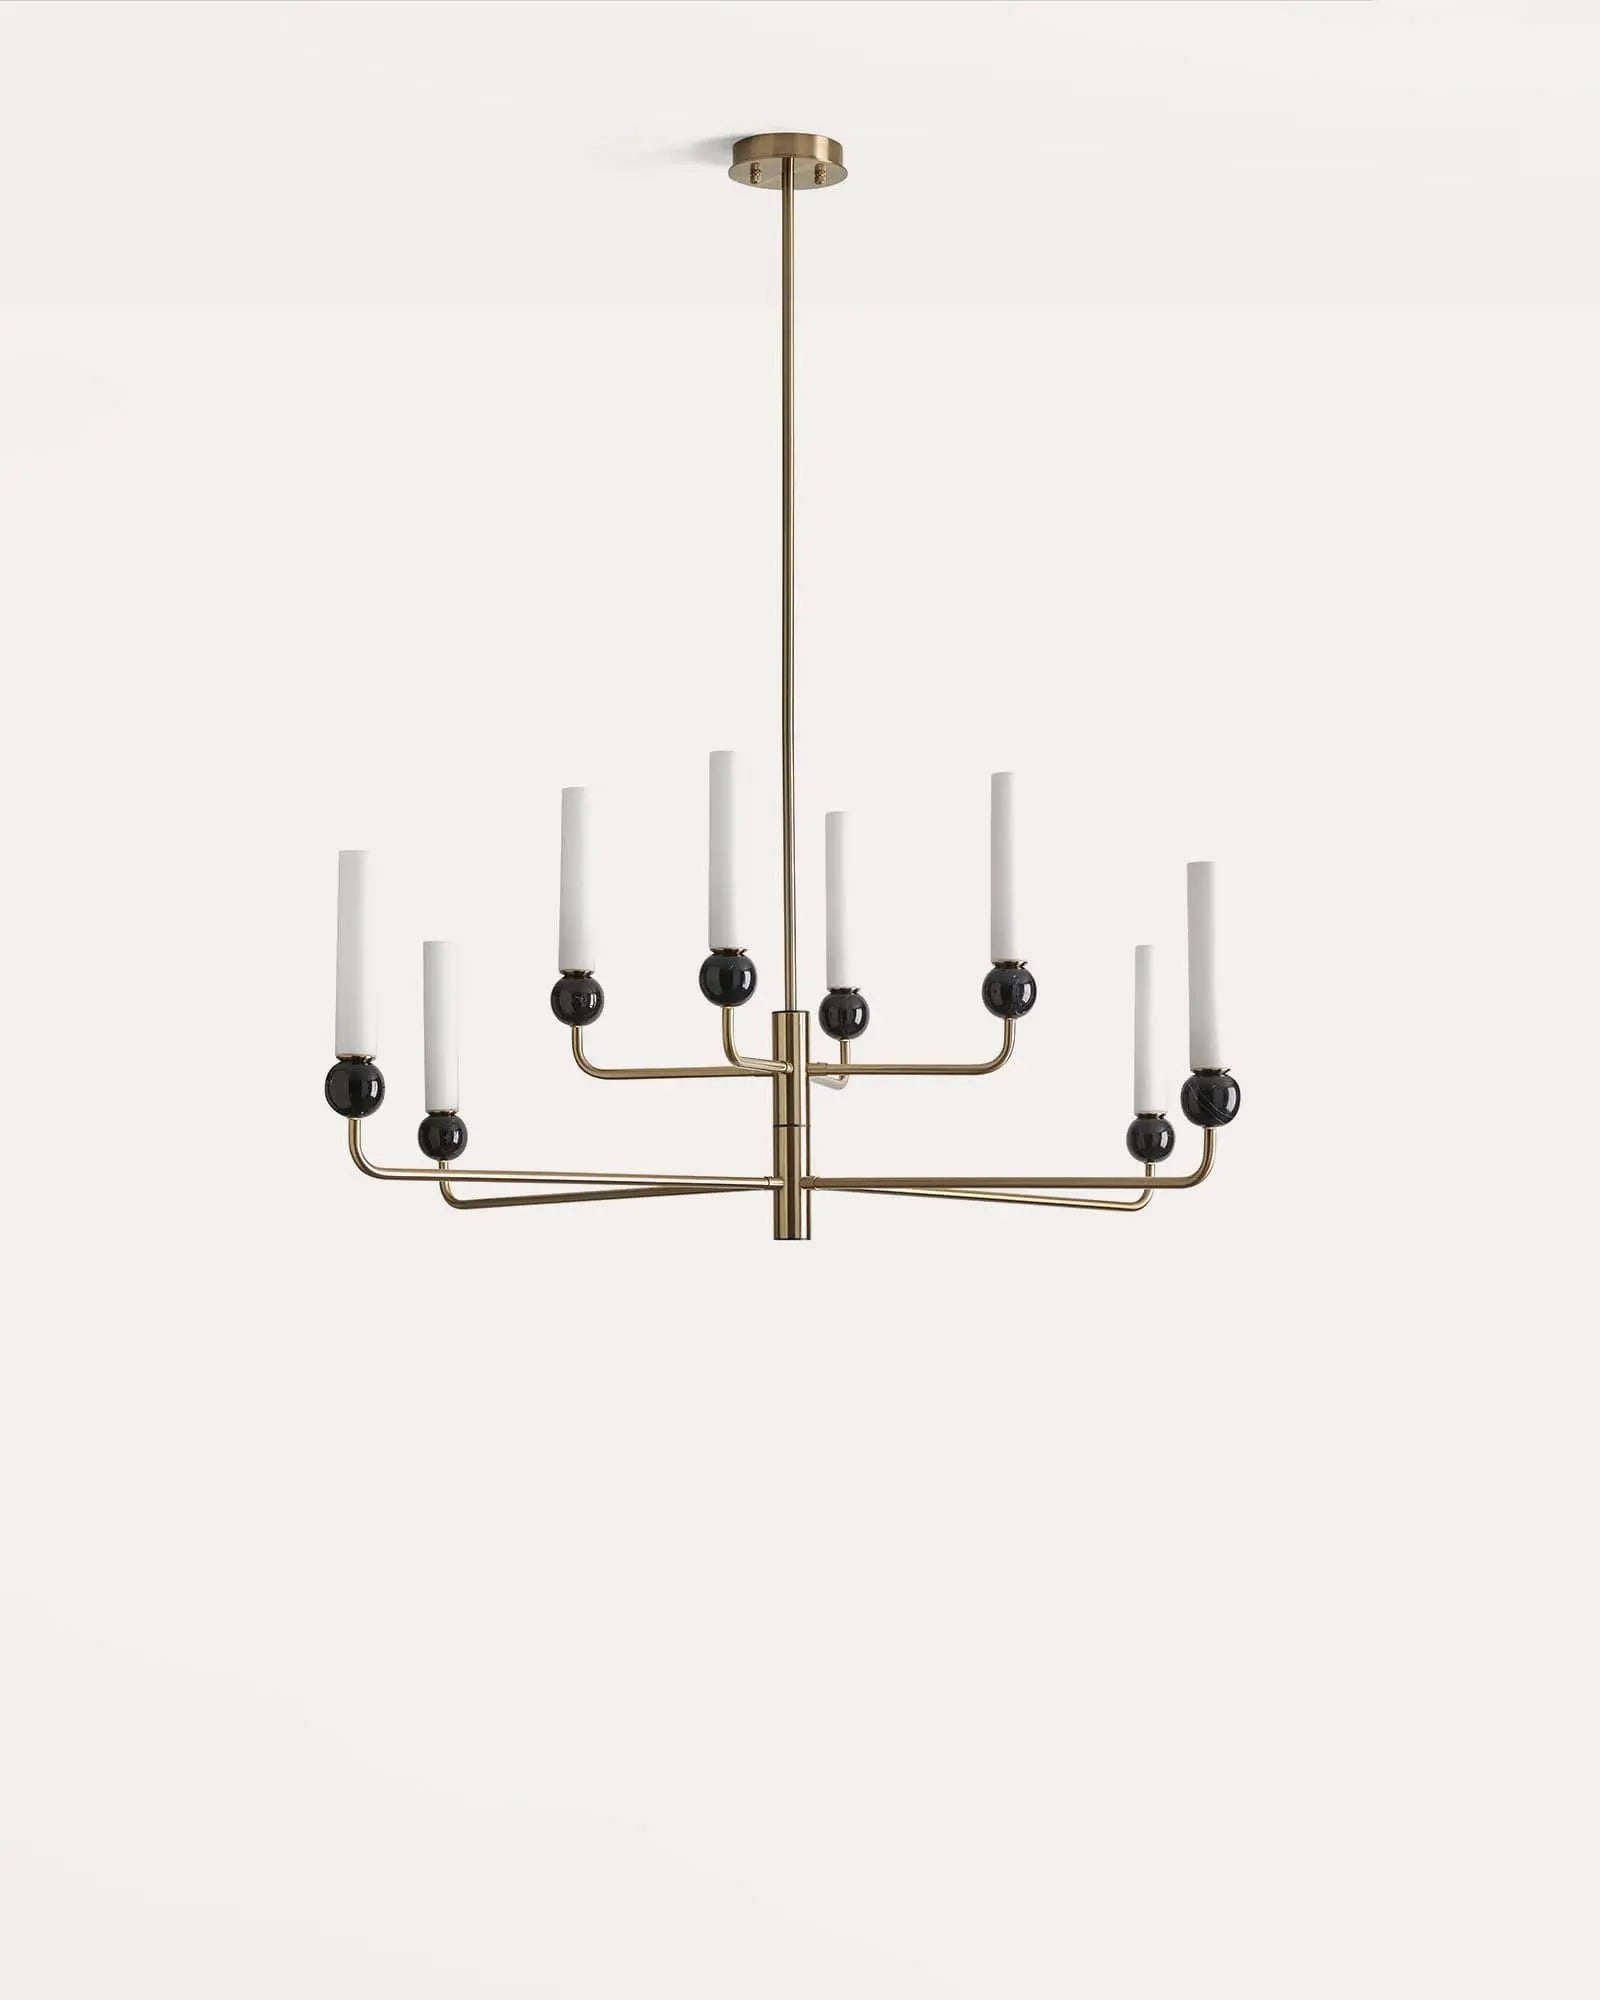 Delie 8 pendant light marble sphere and opal glass shade brass